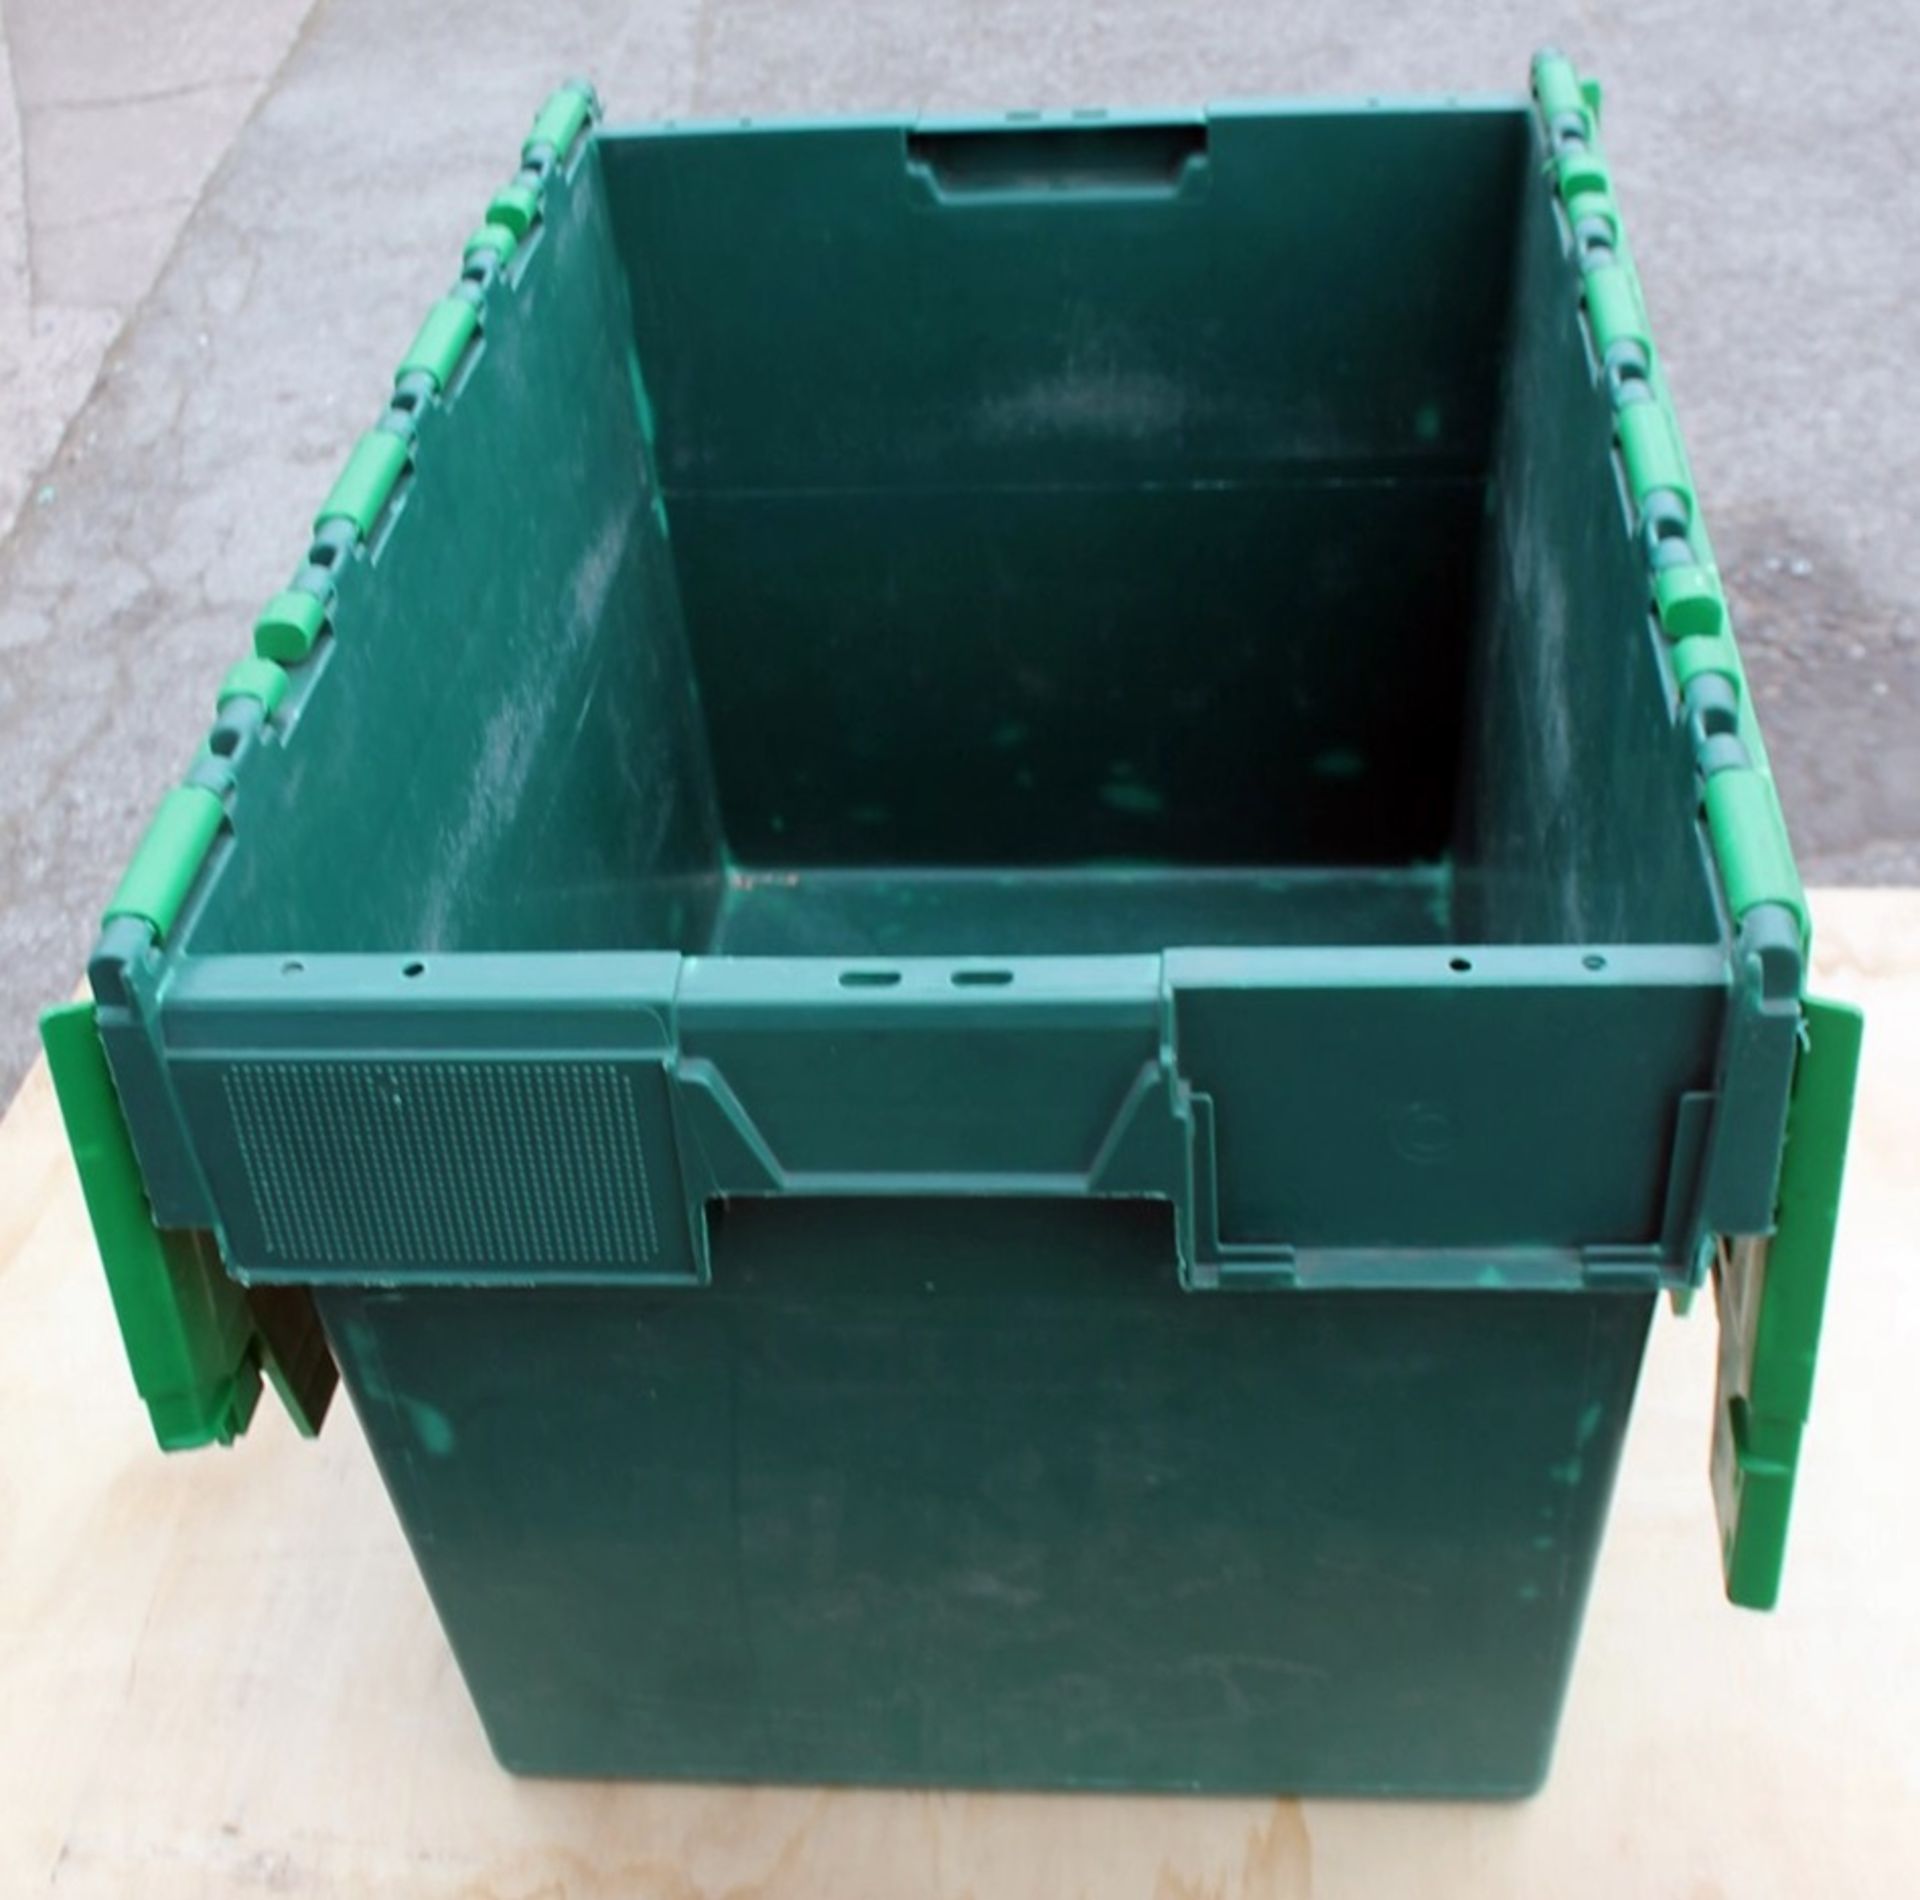 20 x Robust Green Plastic Secure Storage Boxes With Attached Hinged Lids And Deep Storage - - Image 3 of 7